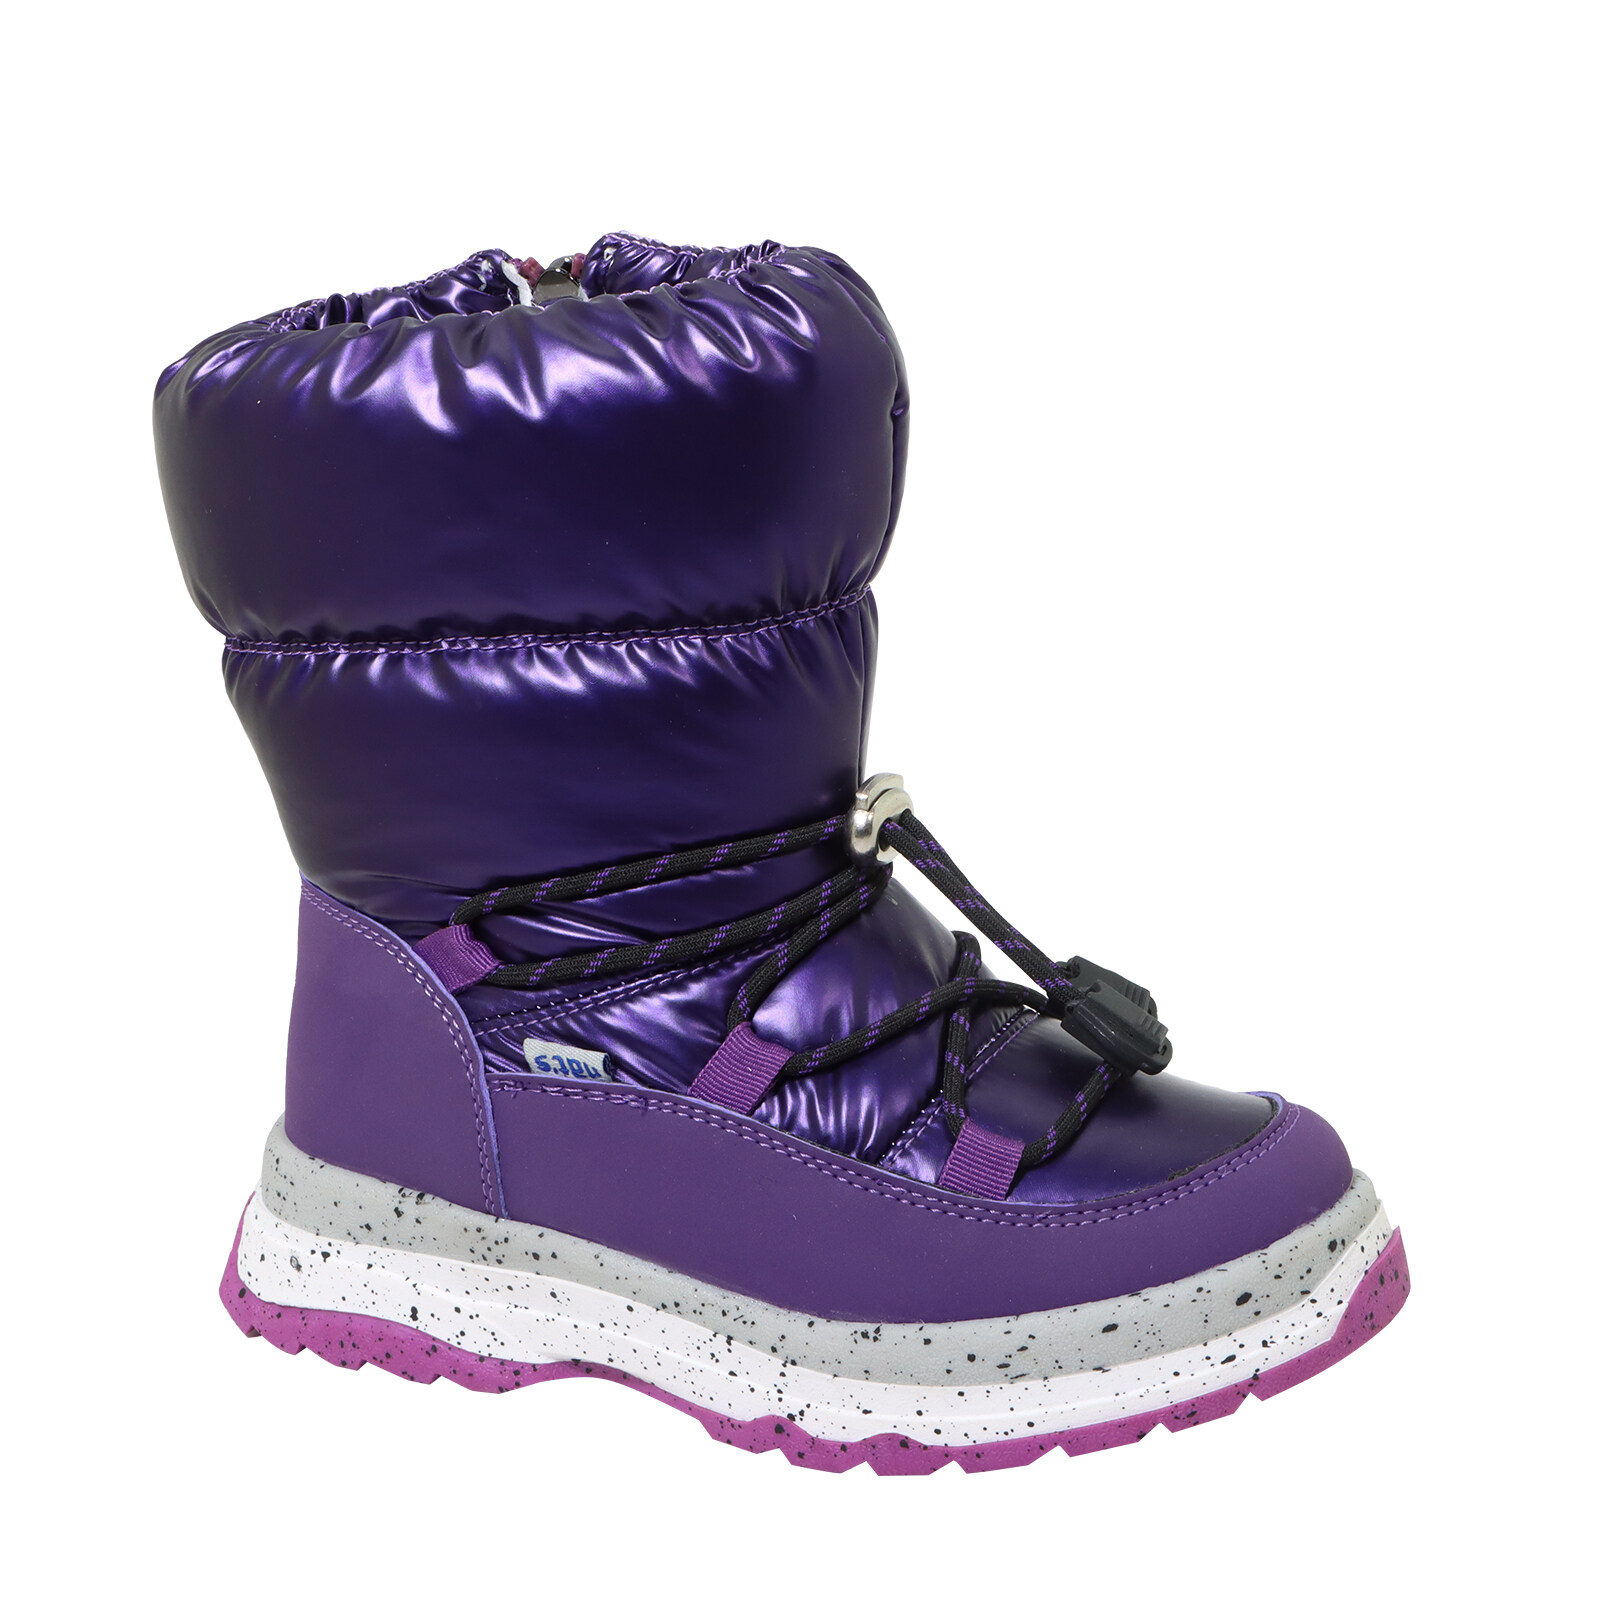 High quality boy's waterproof boot manufacturer direct supply